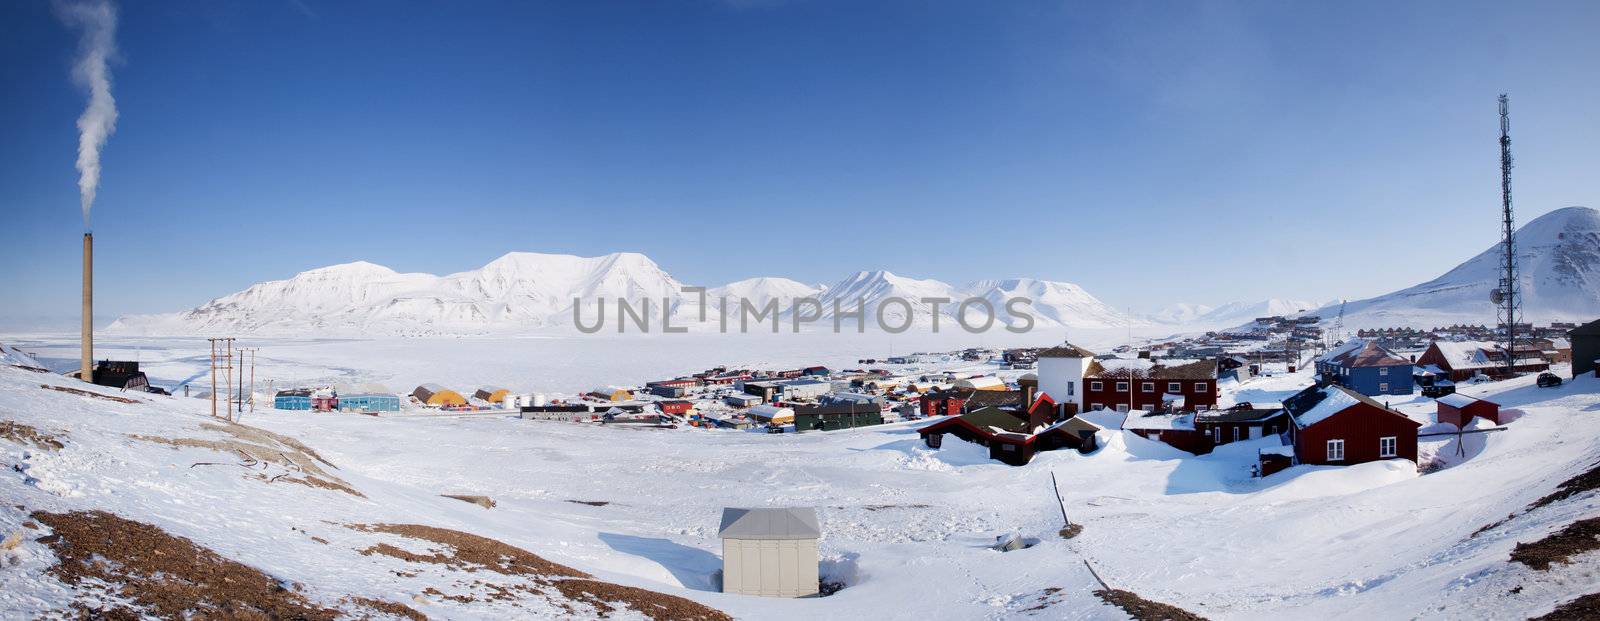 Longyearbyen on the island of Spitsbergen, Norway.  The northern most town in the world.